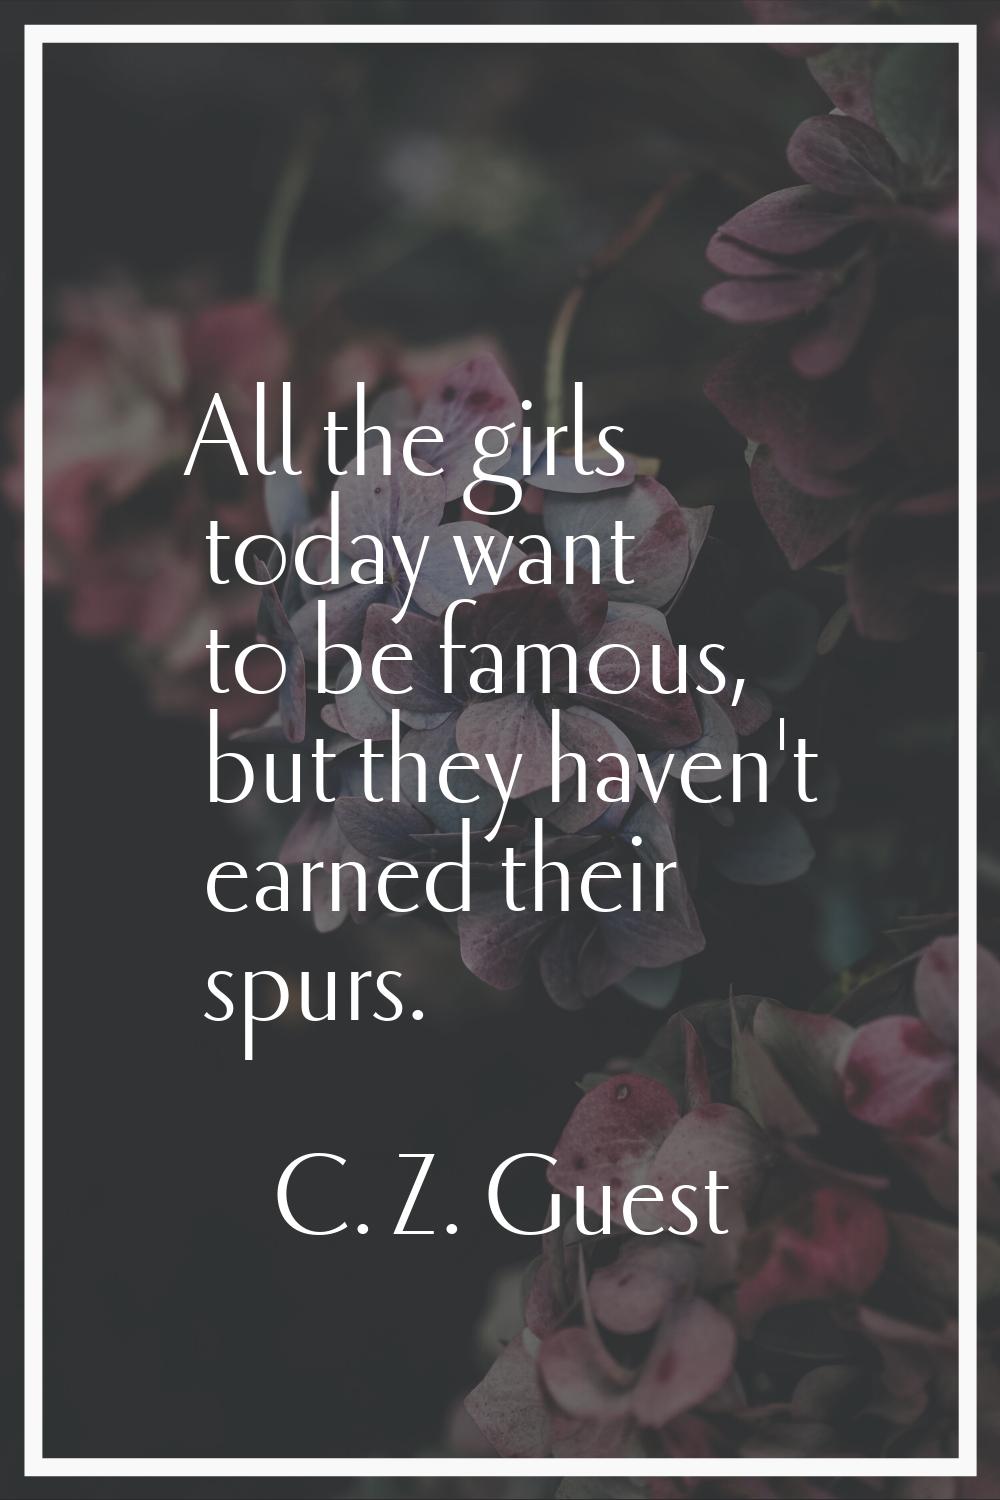 All the girls today want to be famous, but they haven't earned their spurs.